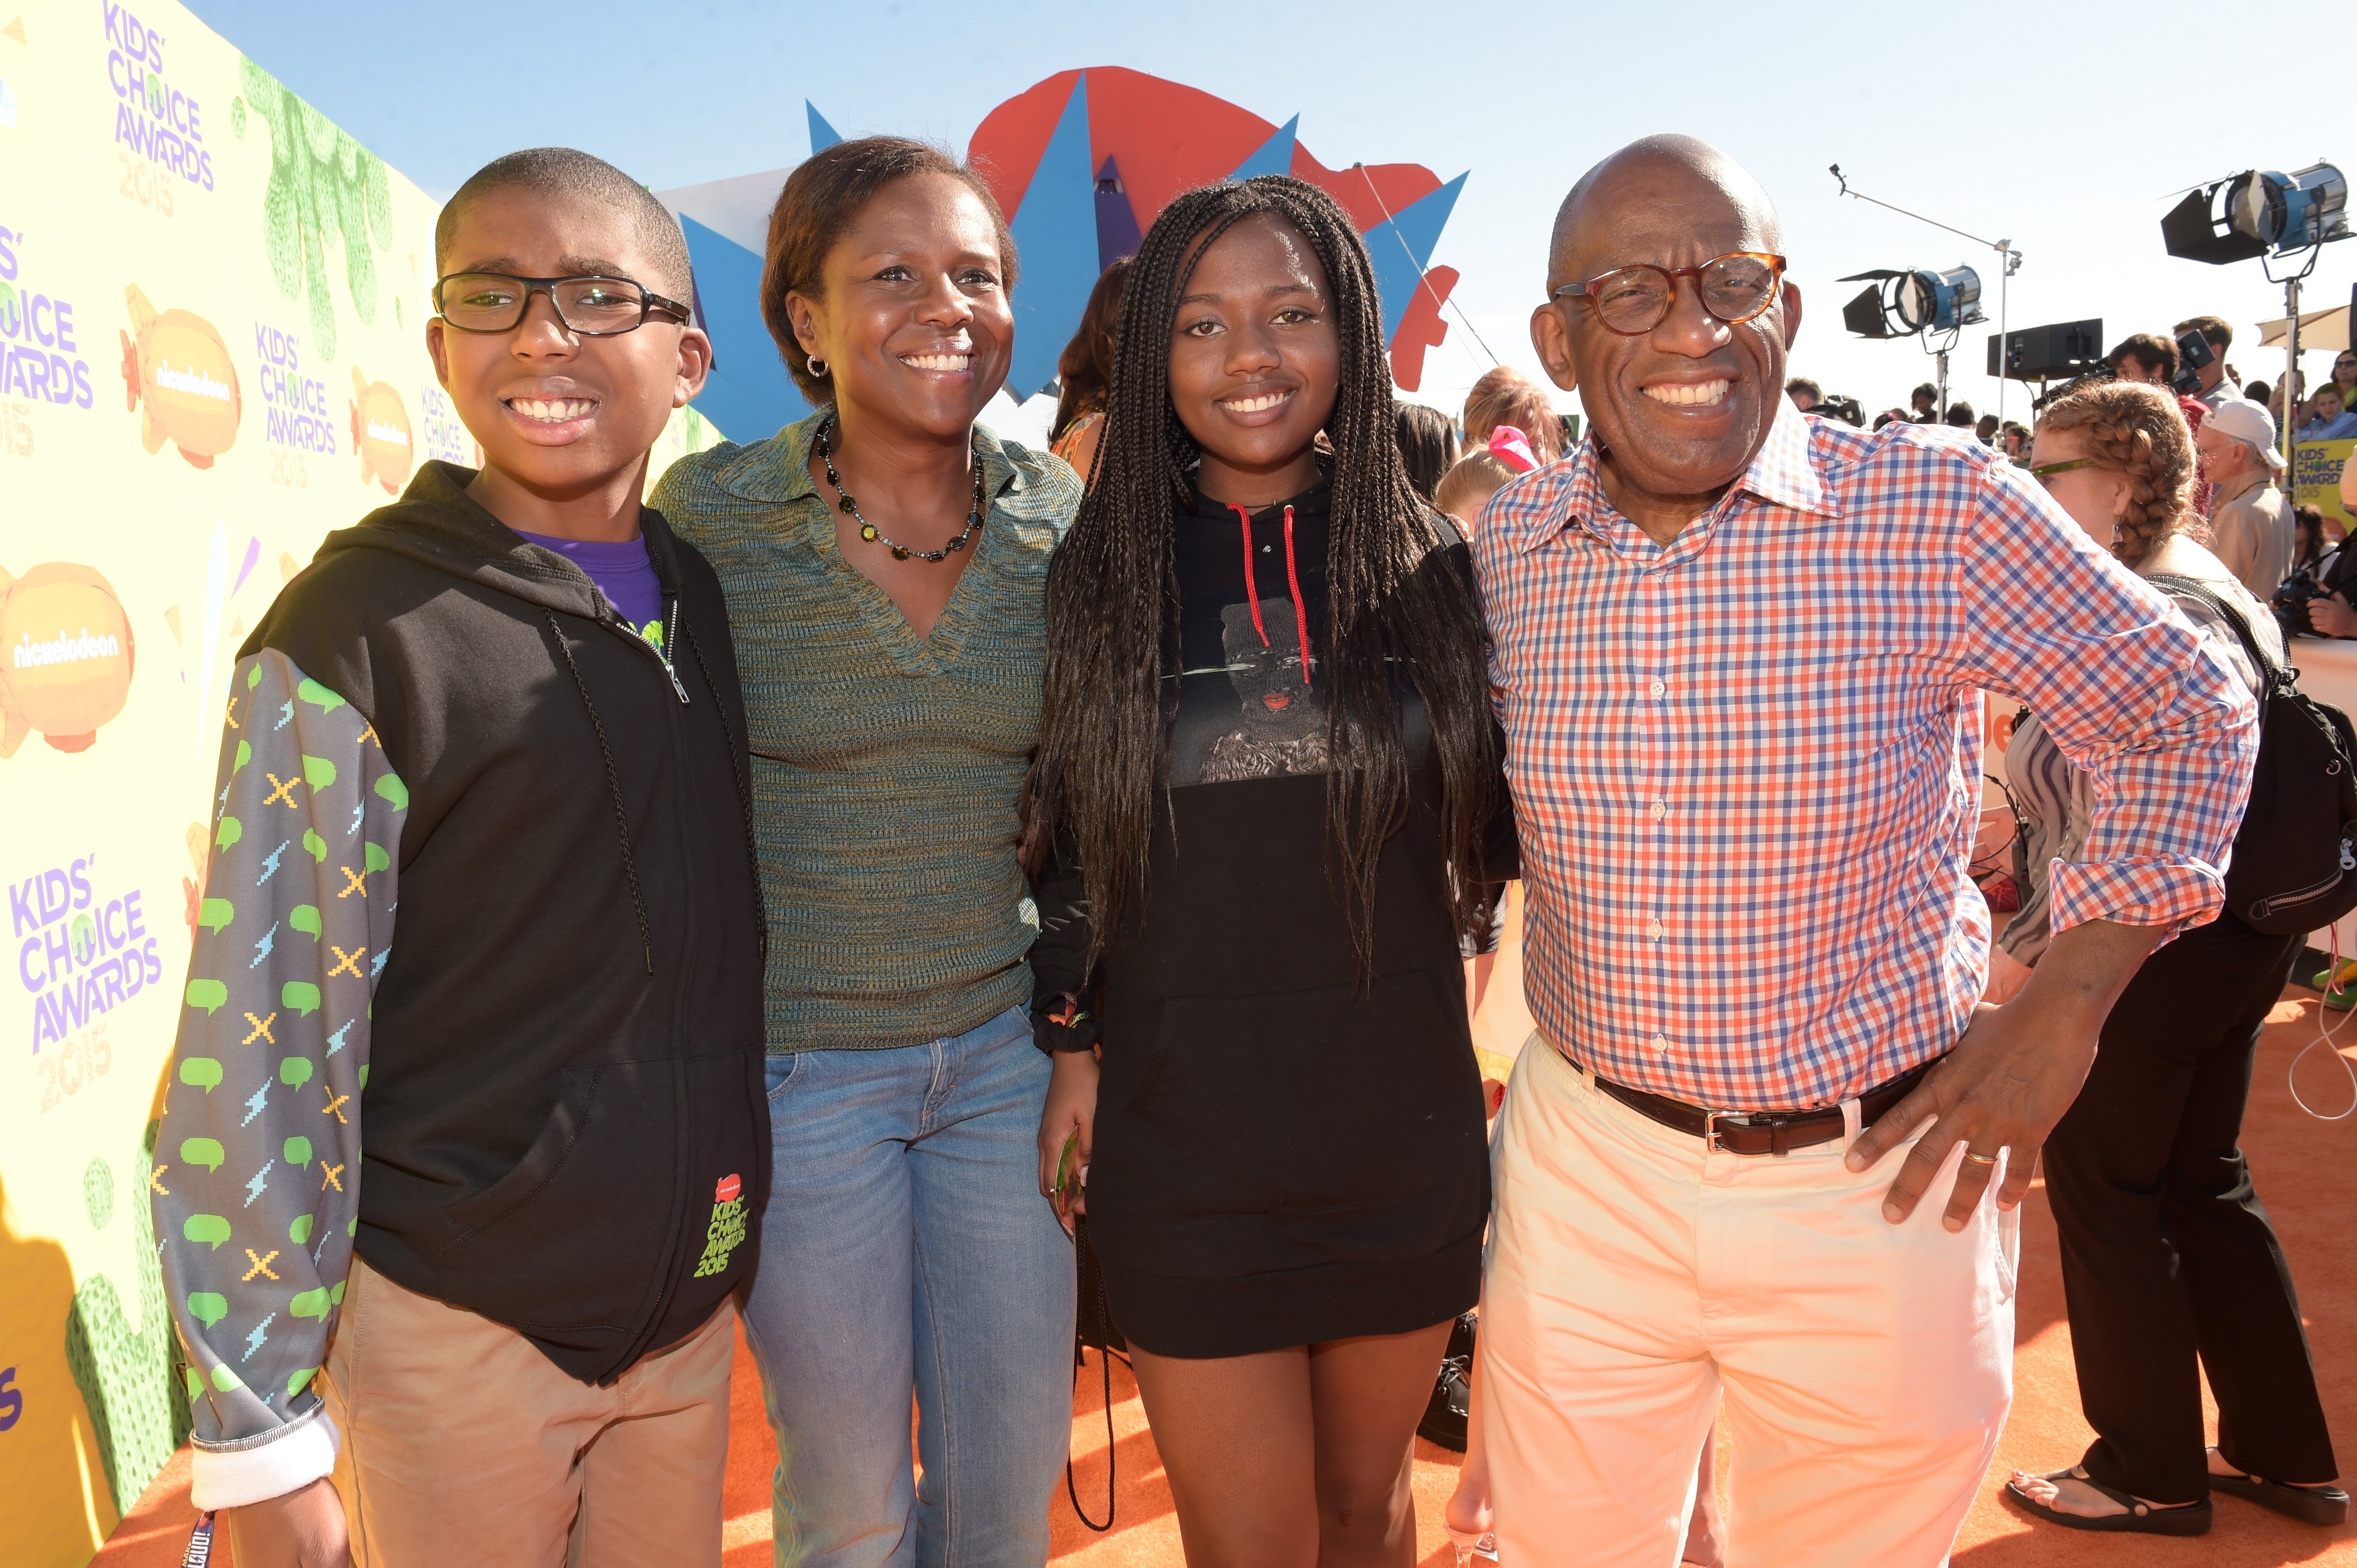 Al Roker with Nicholas Albert Roker, Deborah Roberts and Leila Roker attend Nickelodeon's 28th Annual Kids' Choice Awards held at The Forum on March 28, 2015 in Inglewood, California |  Source: Getty Images